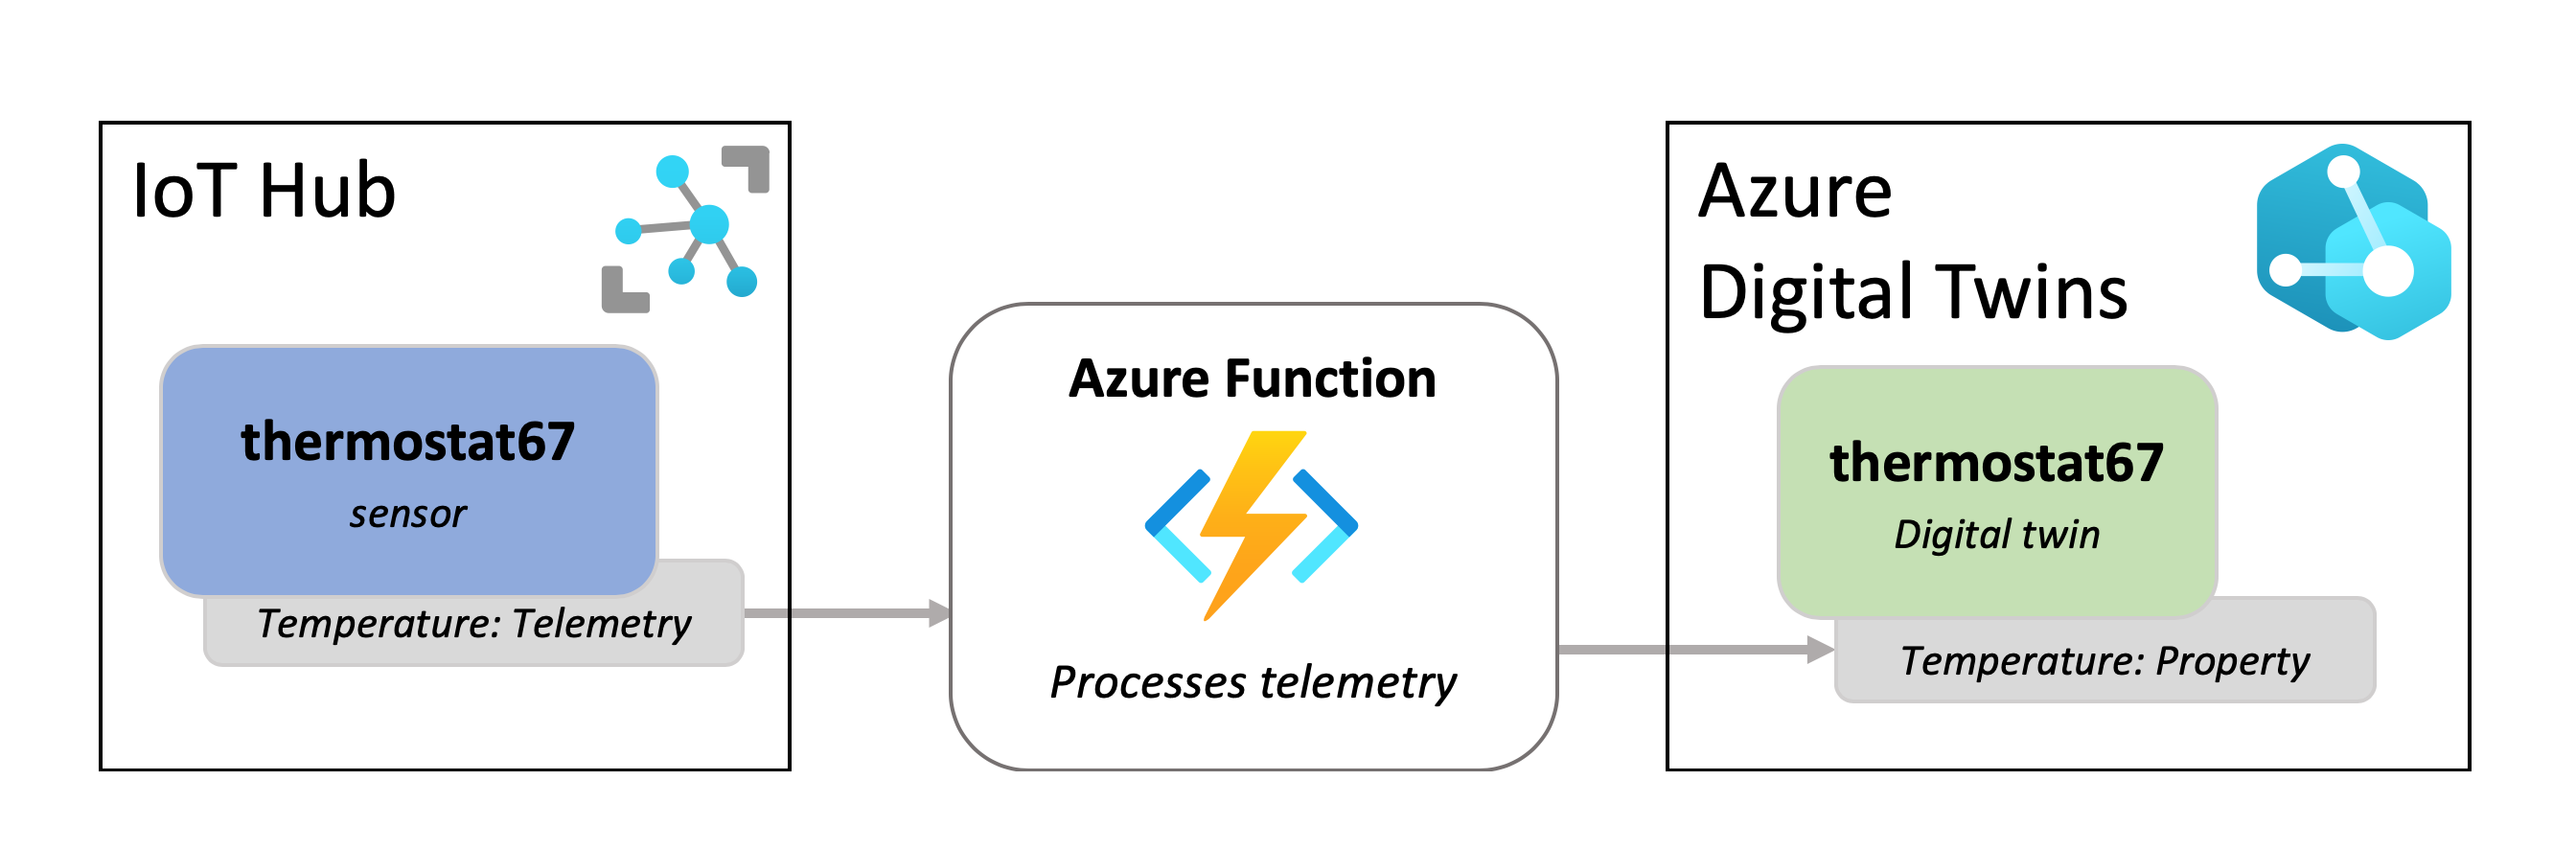 Diagram of IoT Hub device sending Temperature telemetry to a function in Azure, which updates a temperature property on a twin in Azure Digital Twins.